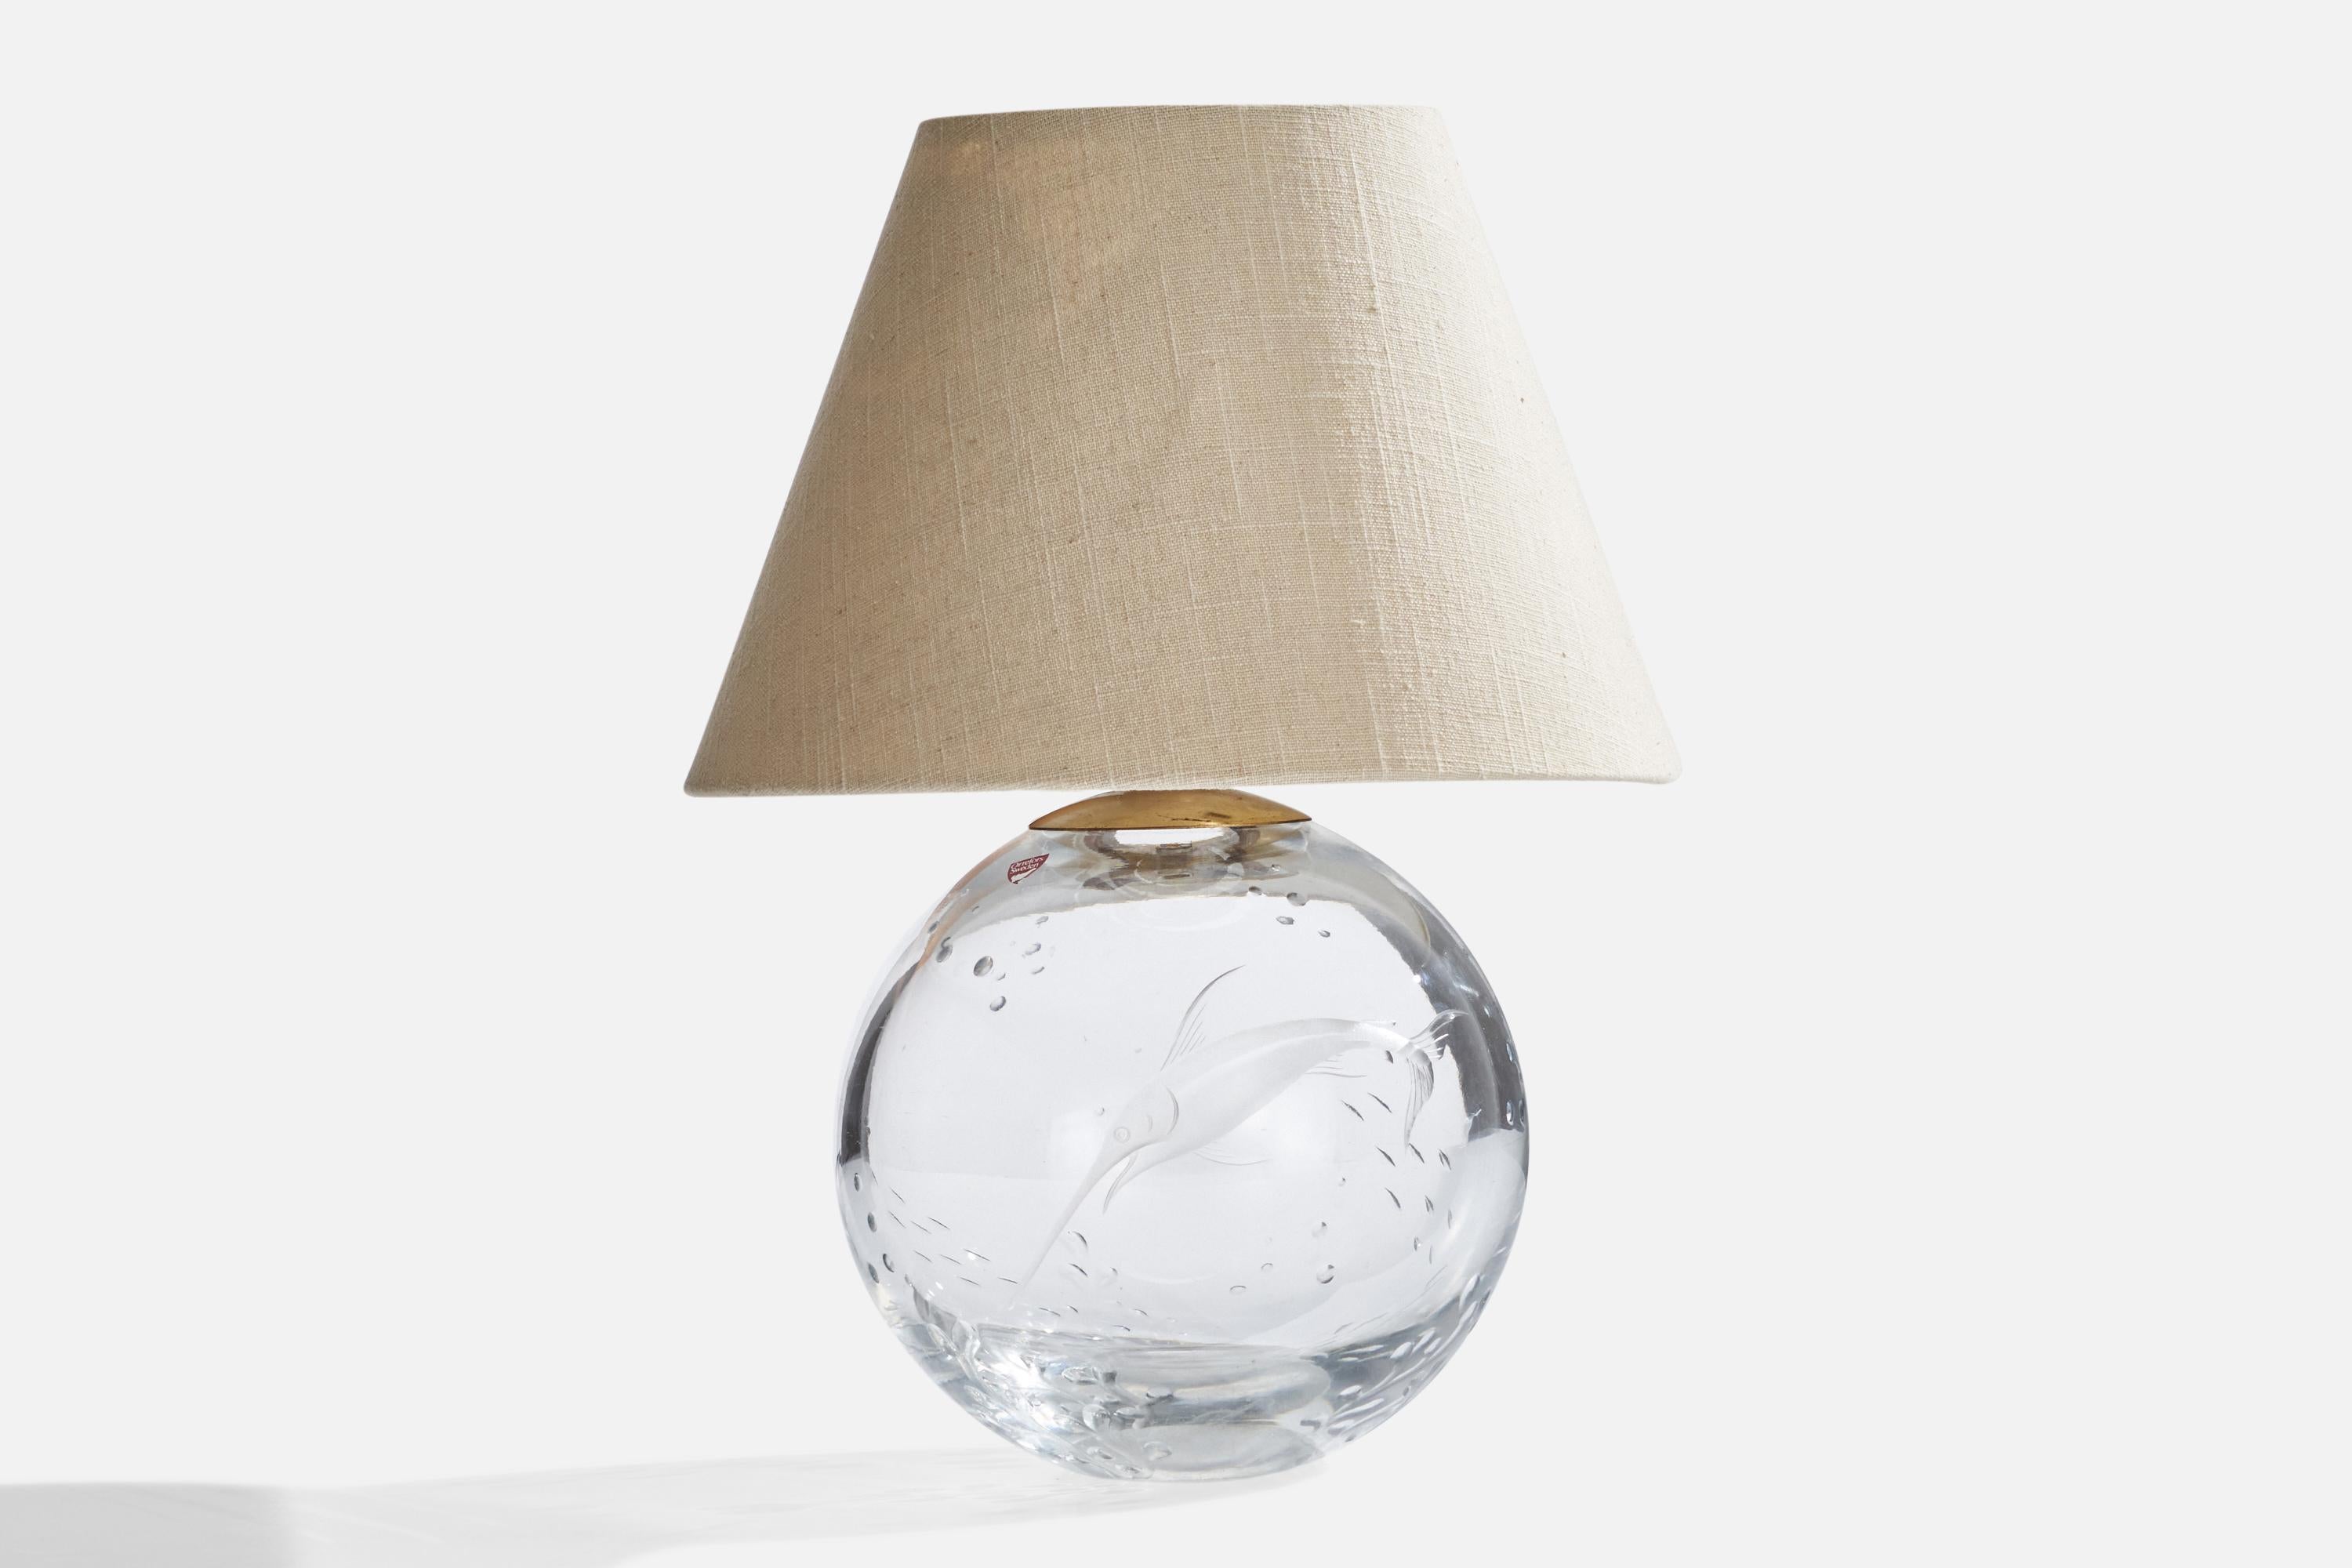 A brass and etched glass and fabric table lamp designed and produced in Sweden, 1930s.

Overall Dimensions (inches): 14.5”  H x 11” D
Stated dimensions include shade.
Bulb Specifications: E-26 Bulb
Number of Sockets: 1
All lighting will be converted